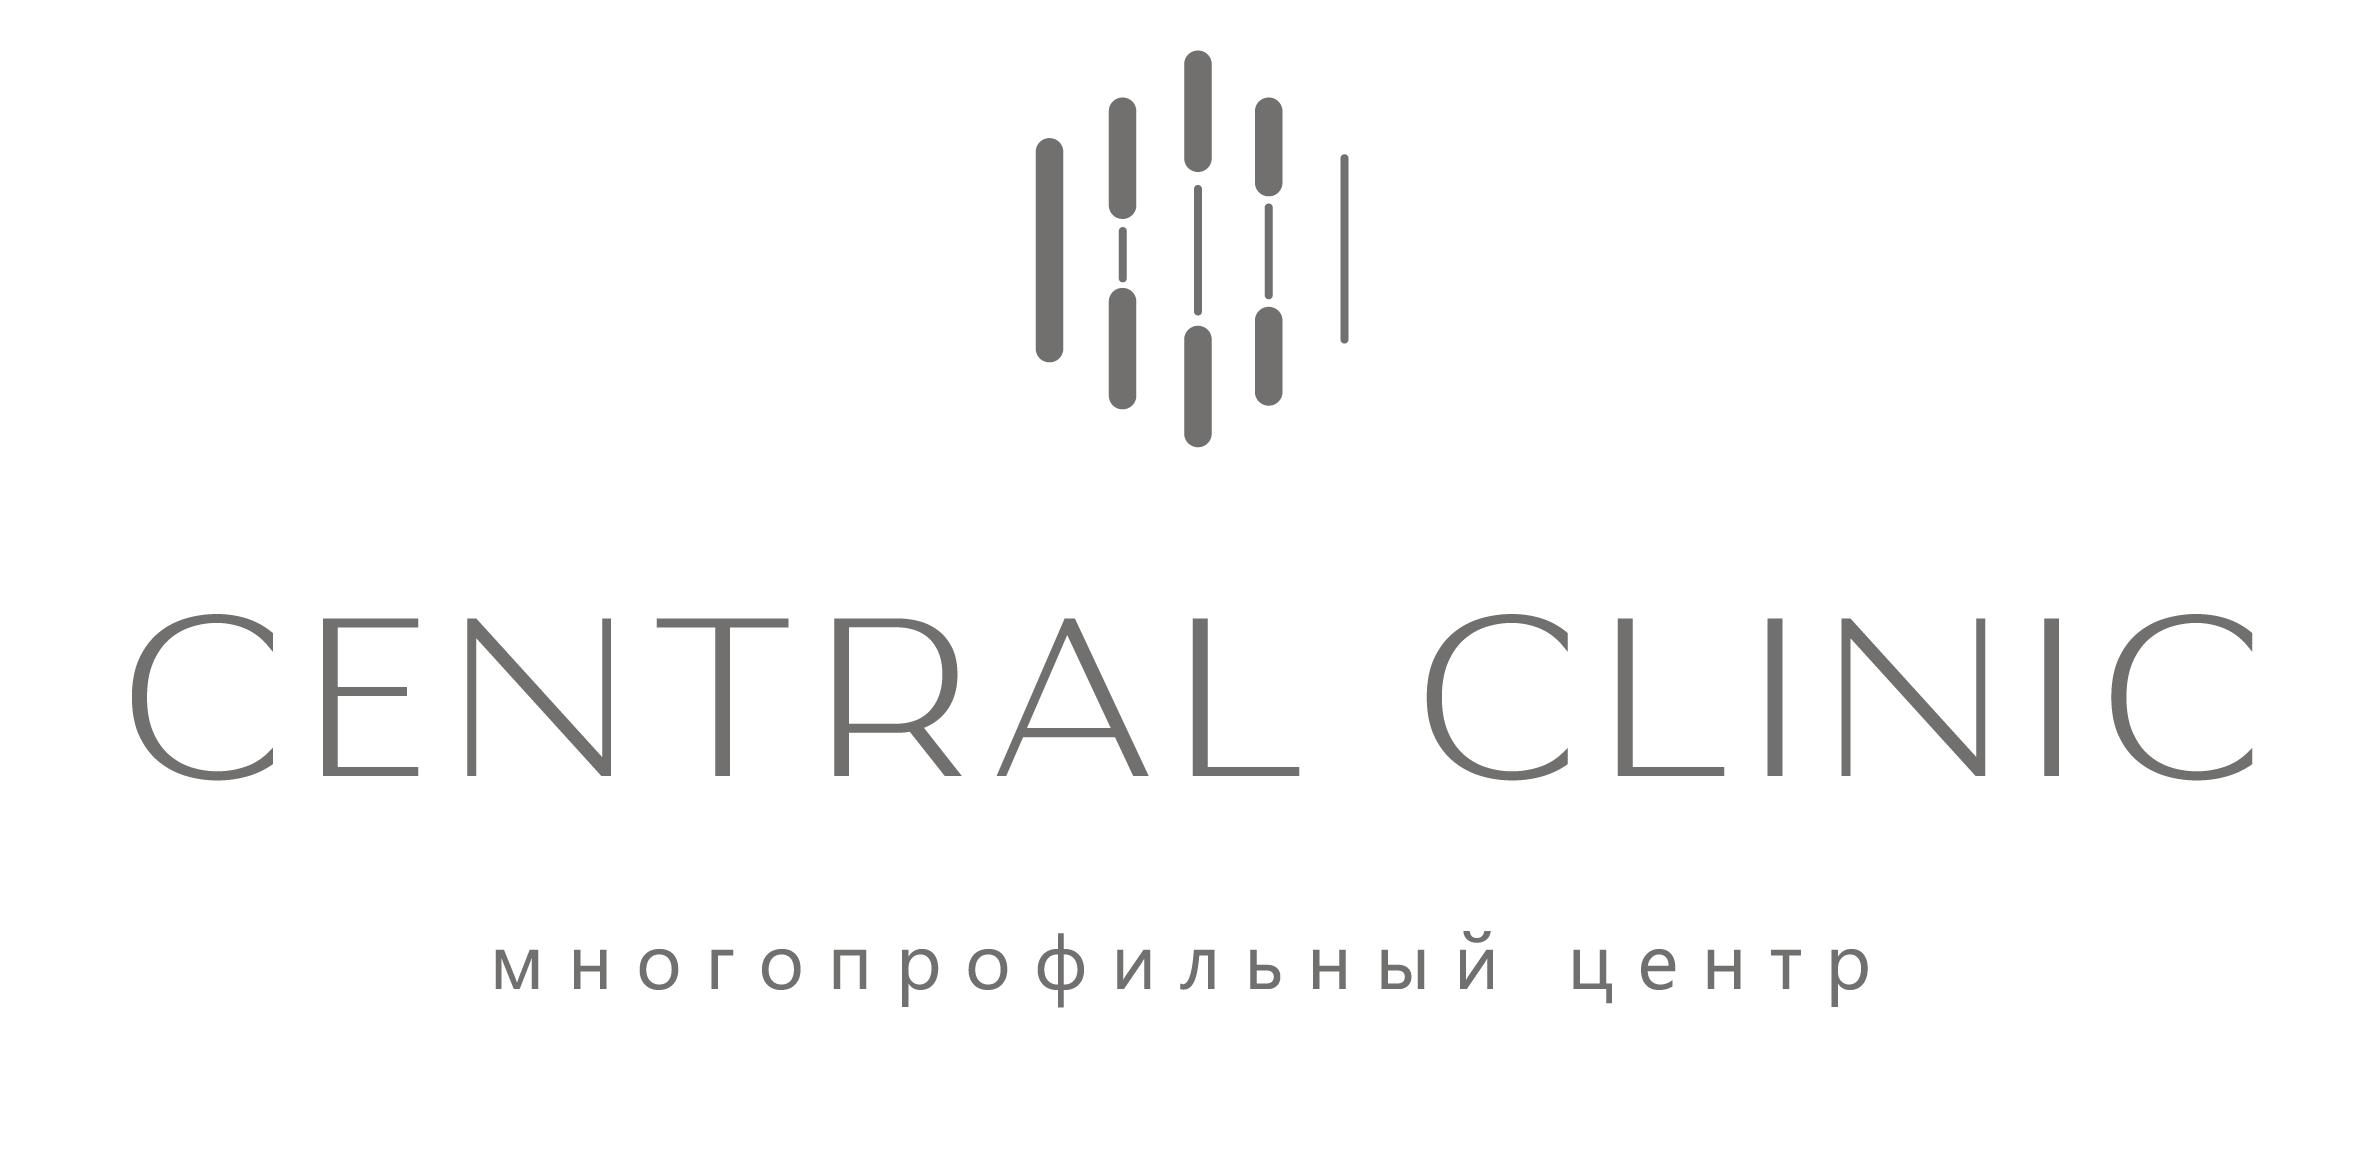 Central clinic. Централ клиник. Central Clinic, Волгоград. Пархоменко 1 клиника. Пархоменко 1 Волгоград центр клиник.